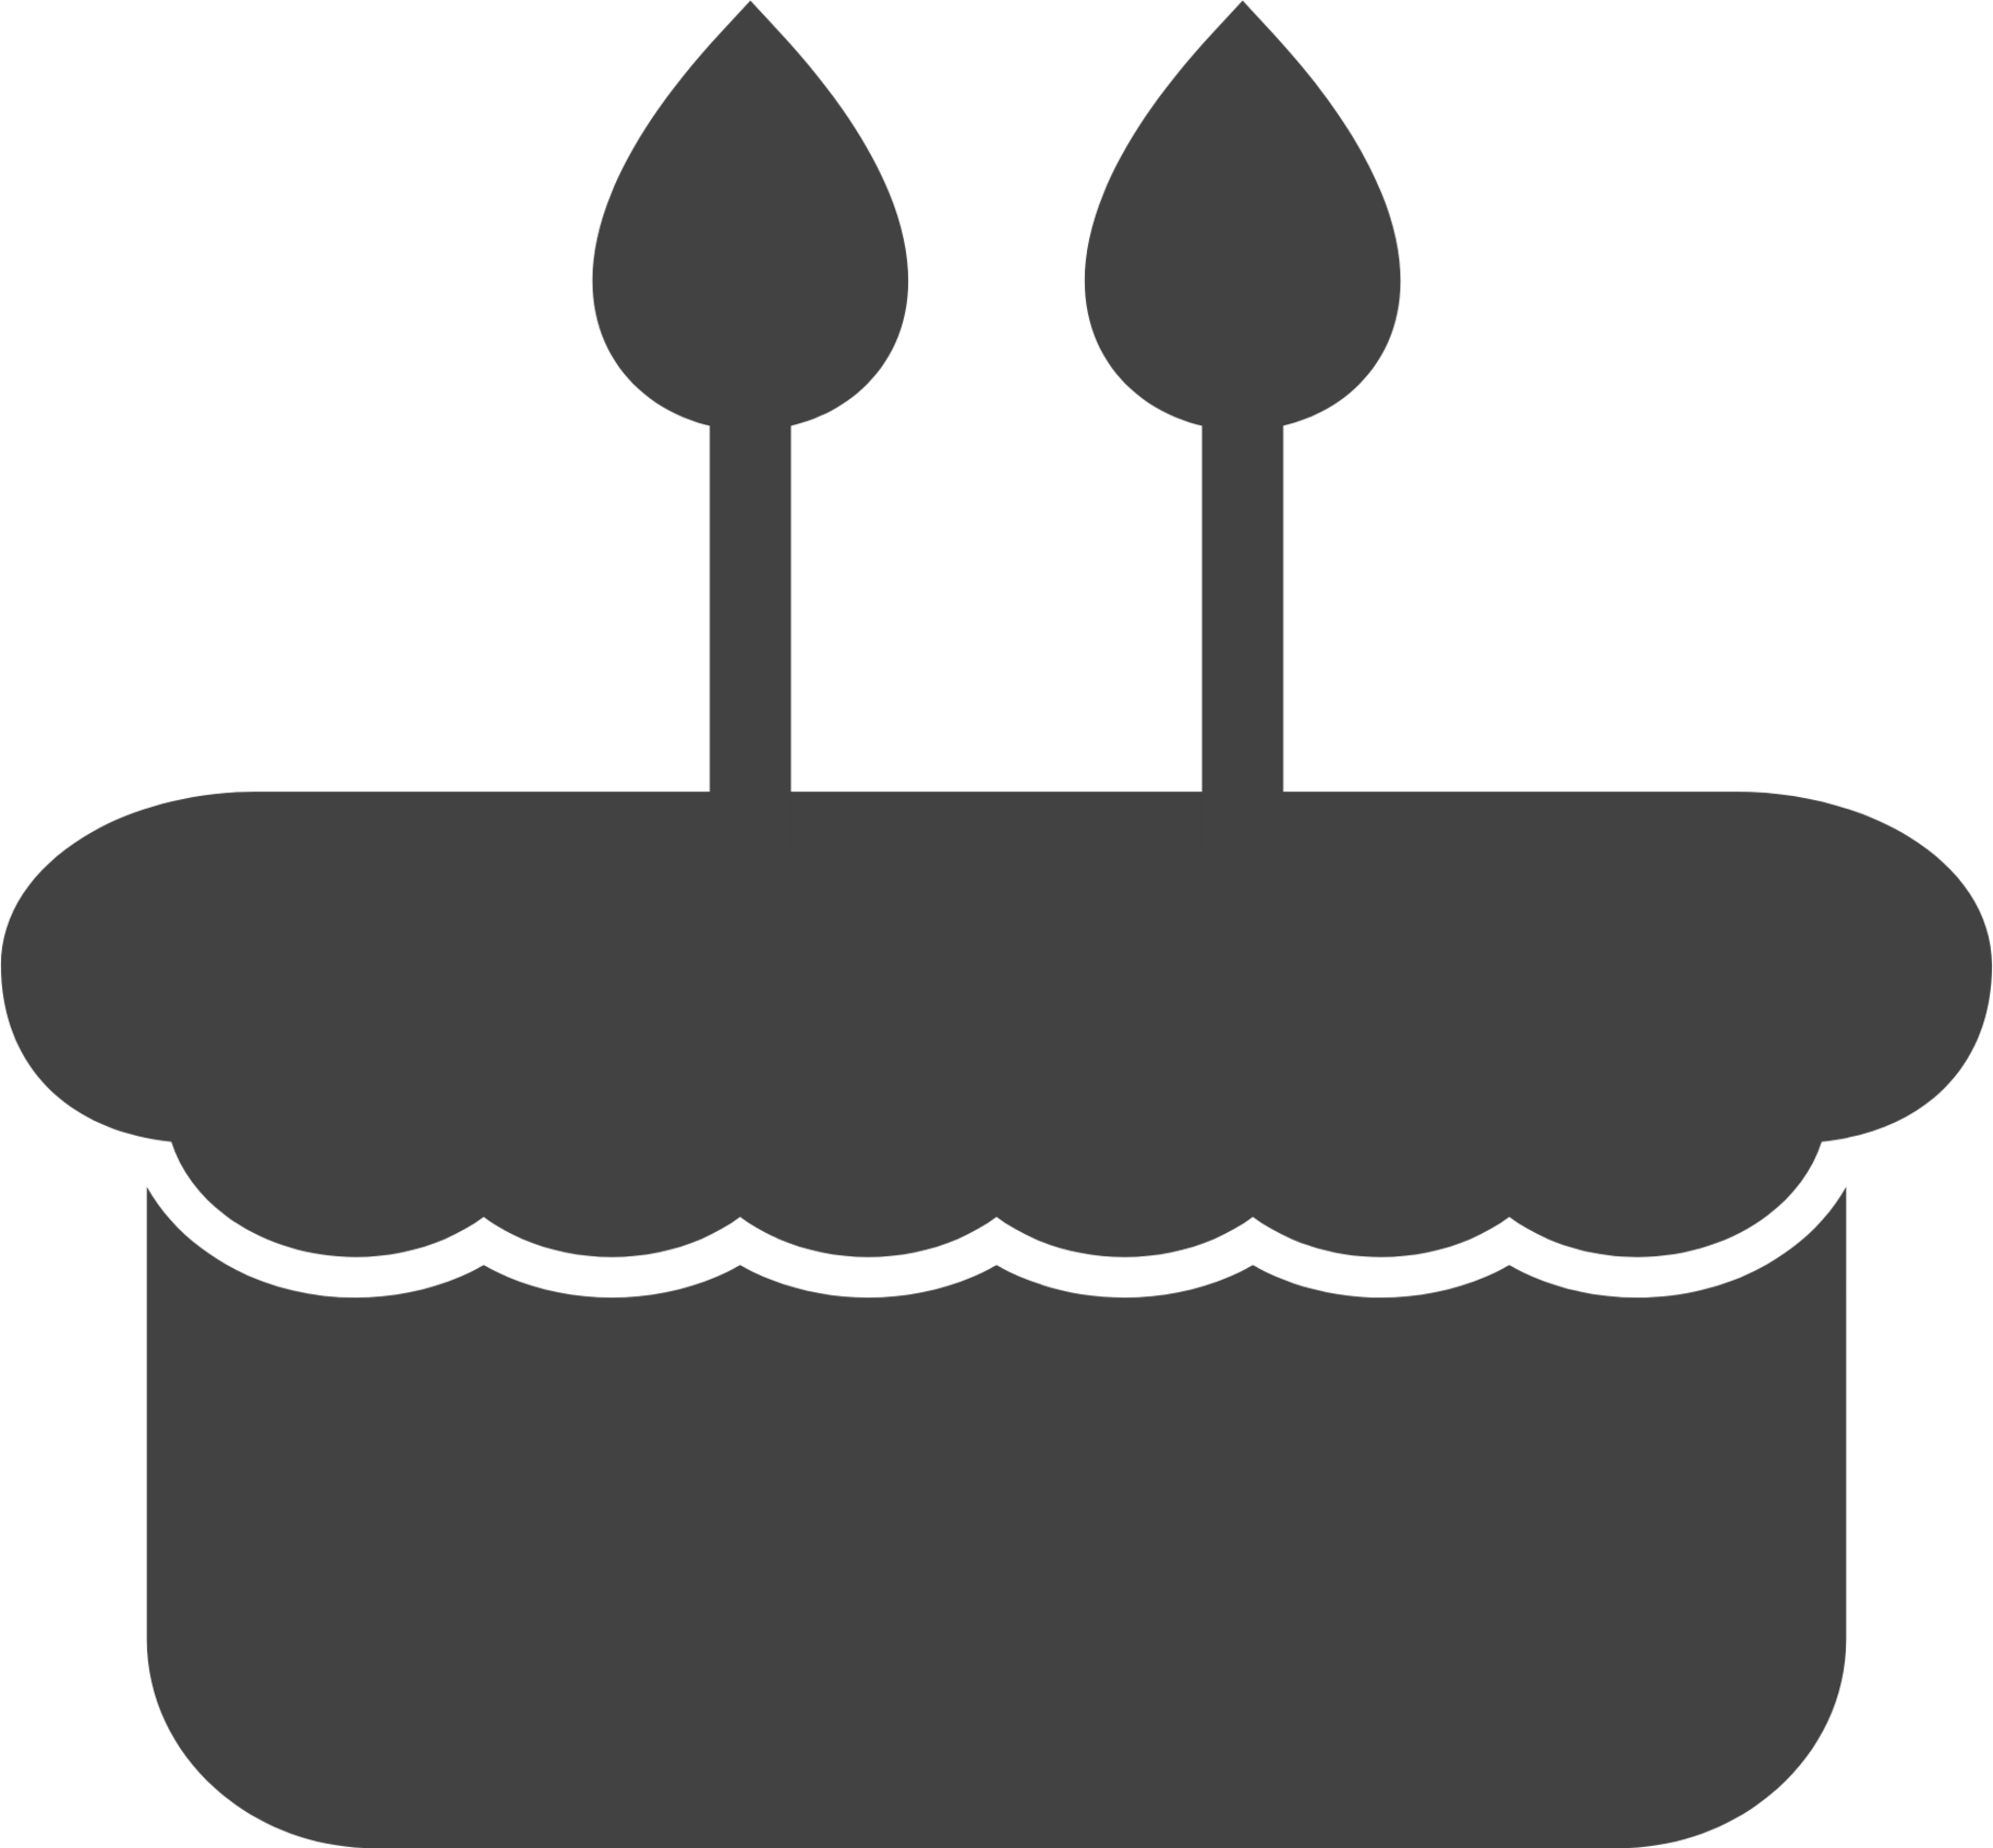 Download Birthday Cake Icons PNG Transparent Background, Free Download  #16548 - FreeIconsPNG